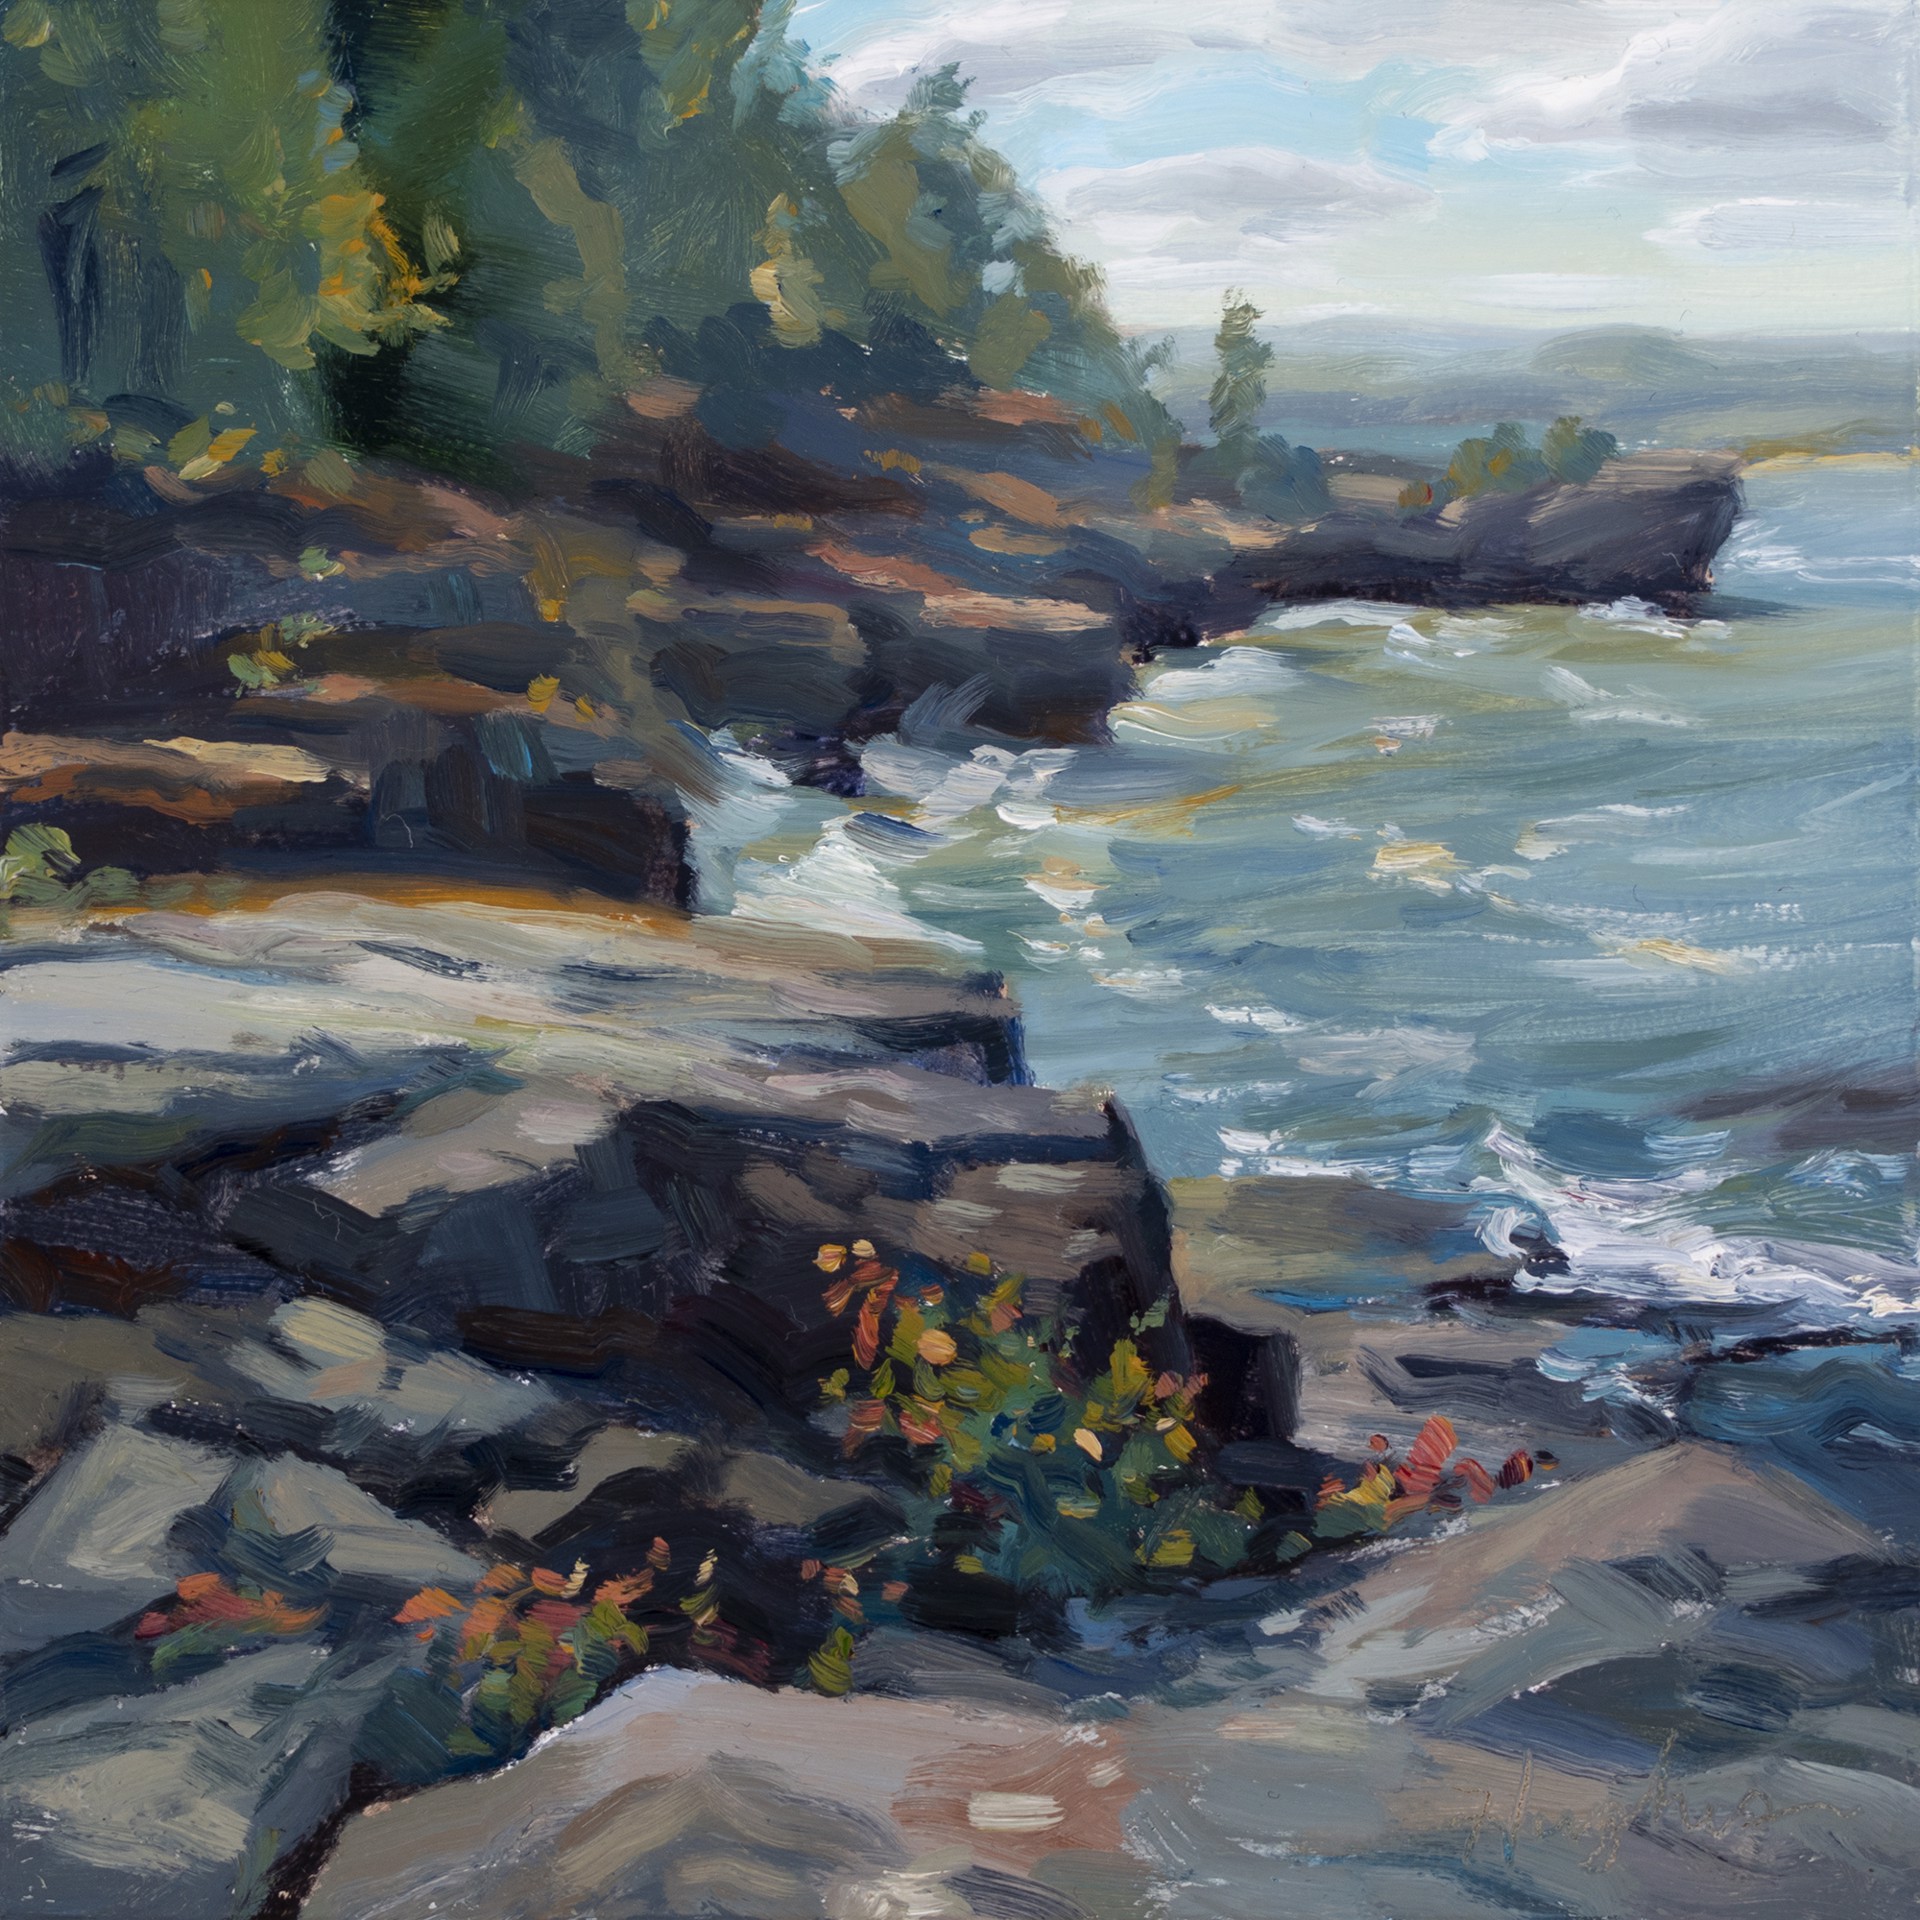 Presque Isle (Day 45), September 17, 2020 by Primary Hughes